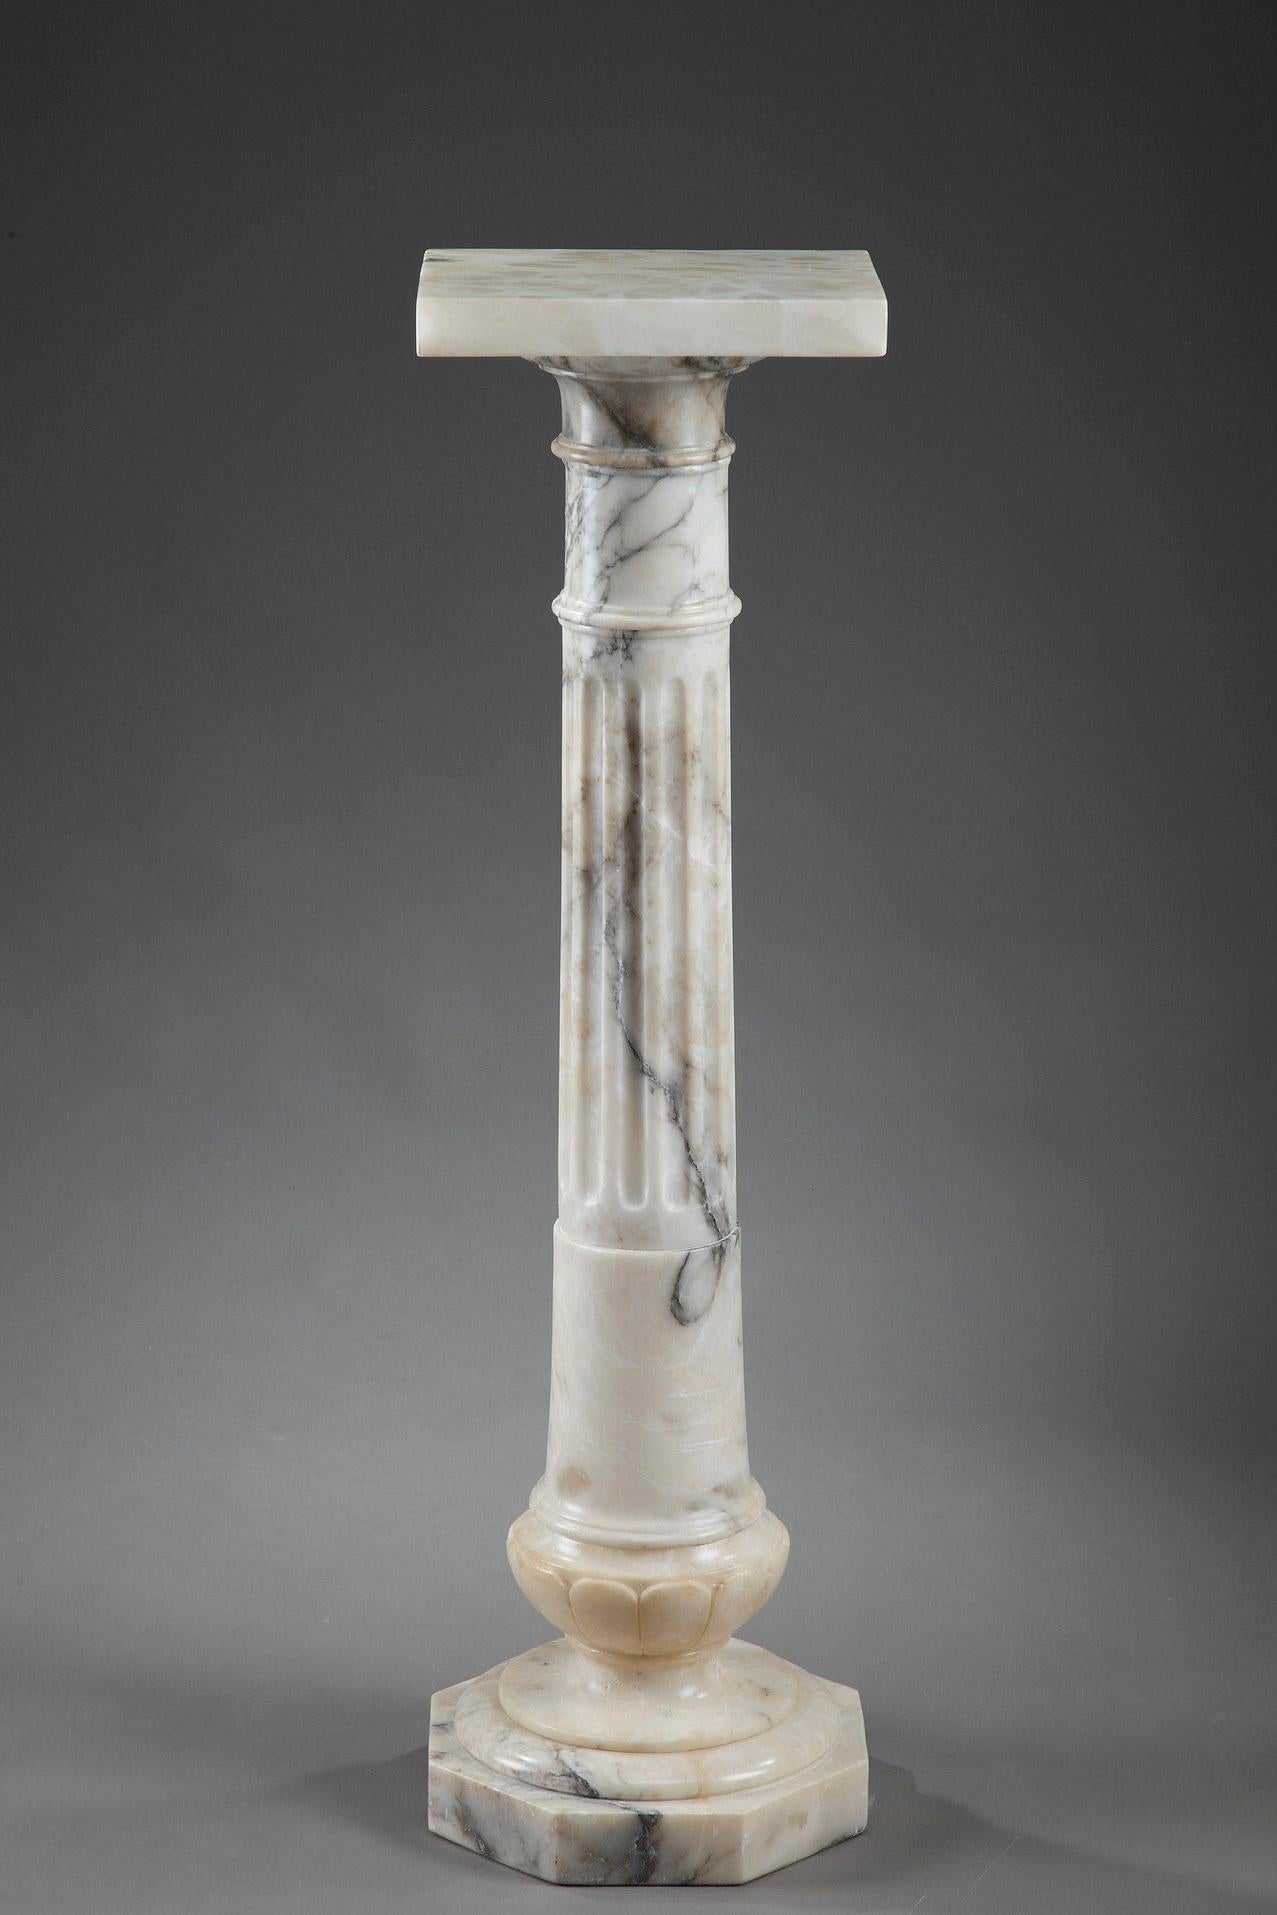 This is a white veined marble pedestal in the form of a column with a fluted shaft. The ringed capital is covered with a square top where a sculpture or clock can be placed. The feet of this pedestal are decorated with prominent gadroons and it